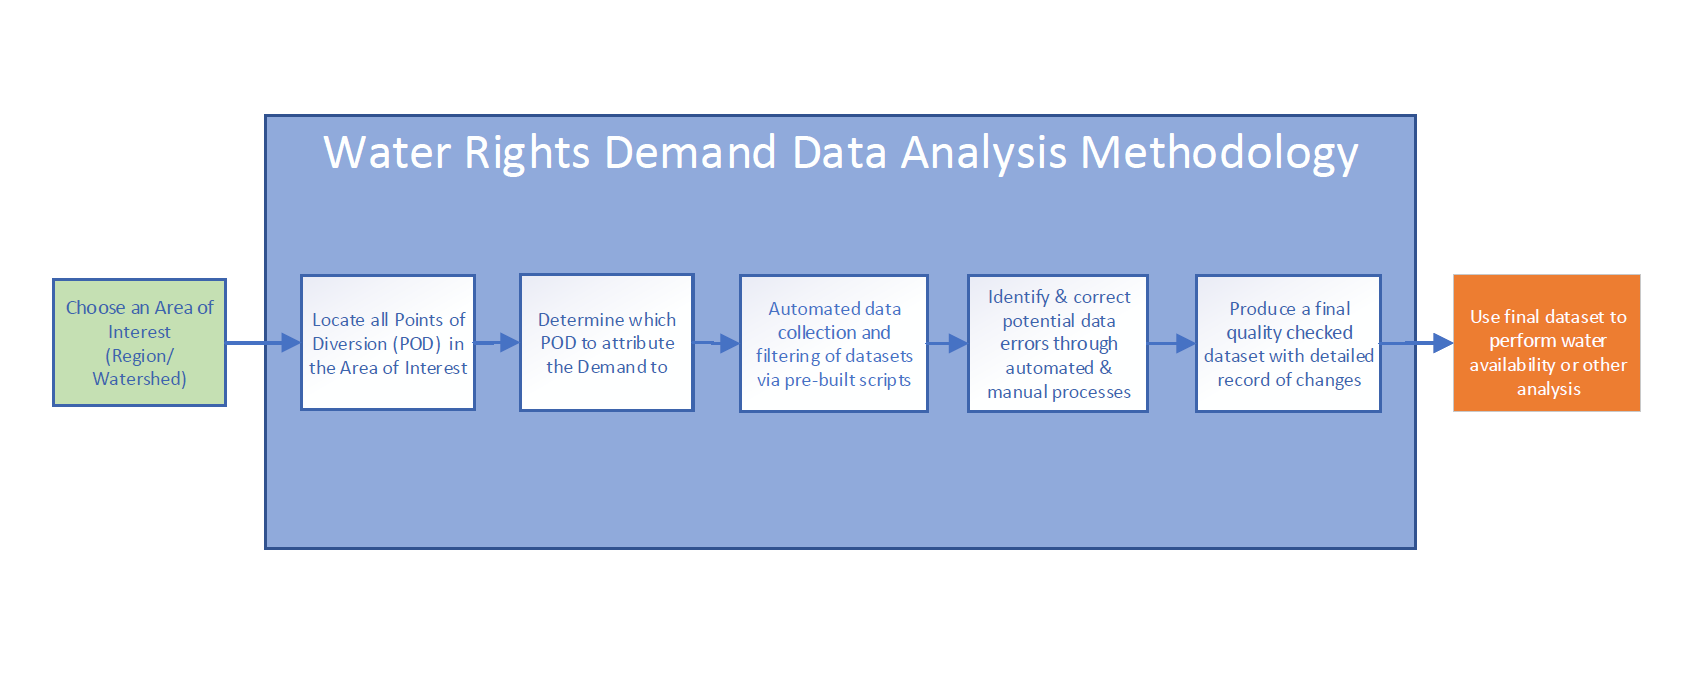 Overview of the Demand Data Analysis Methodology